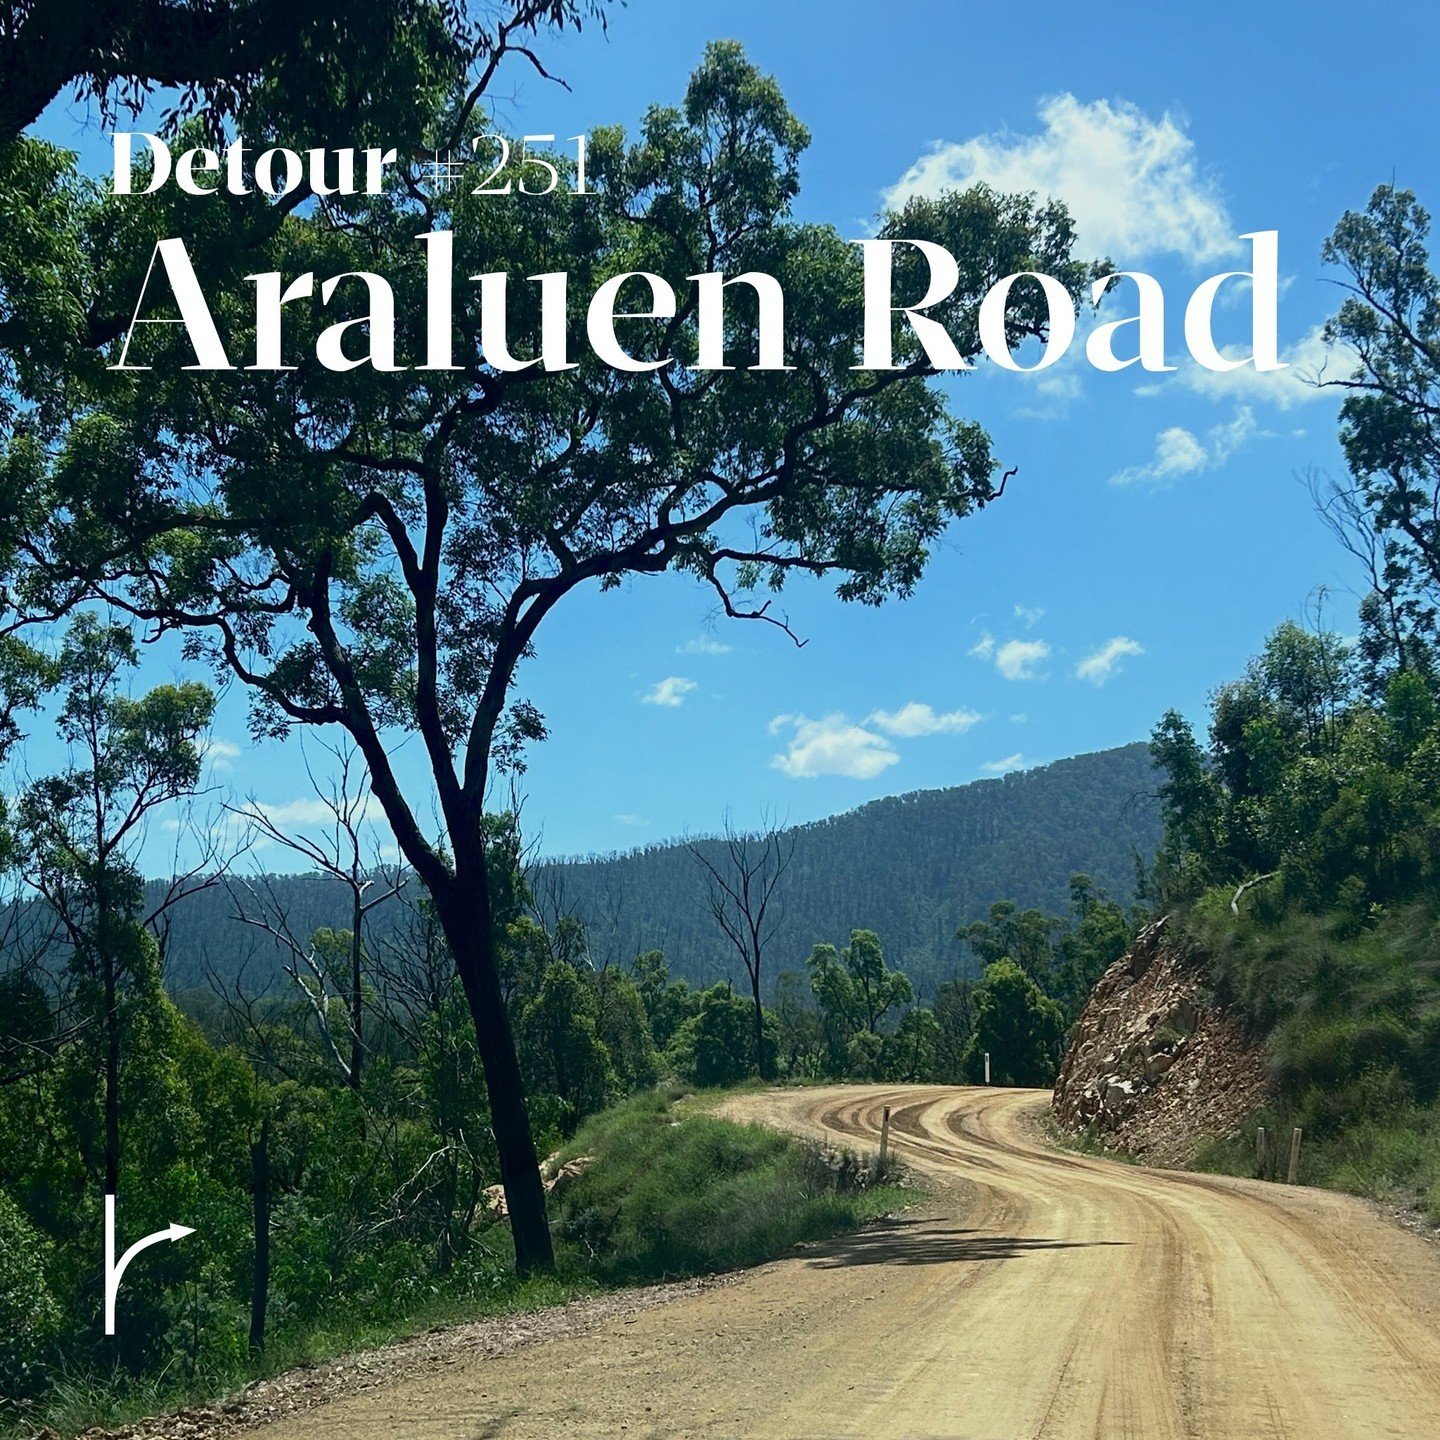 The Araluen Road was once one of the busiest byways in Australia, but now you can have it to yourself, says Mel Nichols @melnicuk⁠
⁠
&quot;After Australia&rsquo;s biggest alluvial goldfield was struck at Araluen in 1851, thousands of fortune seekers 